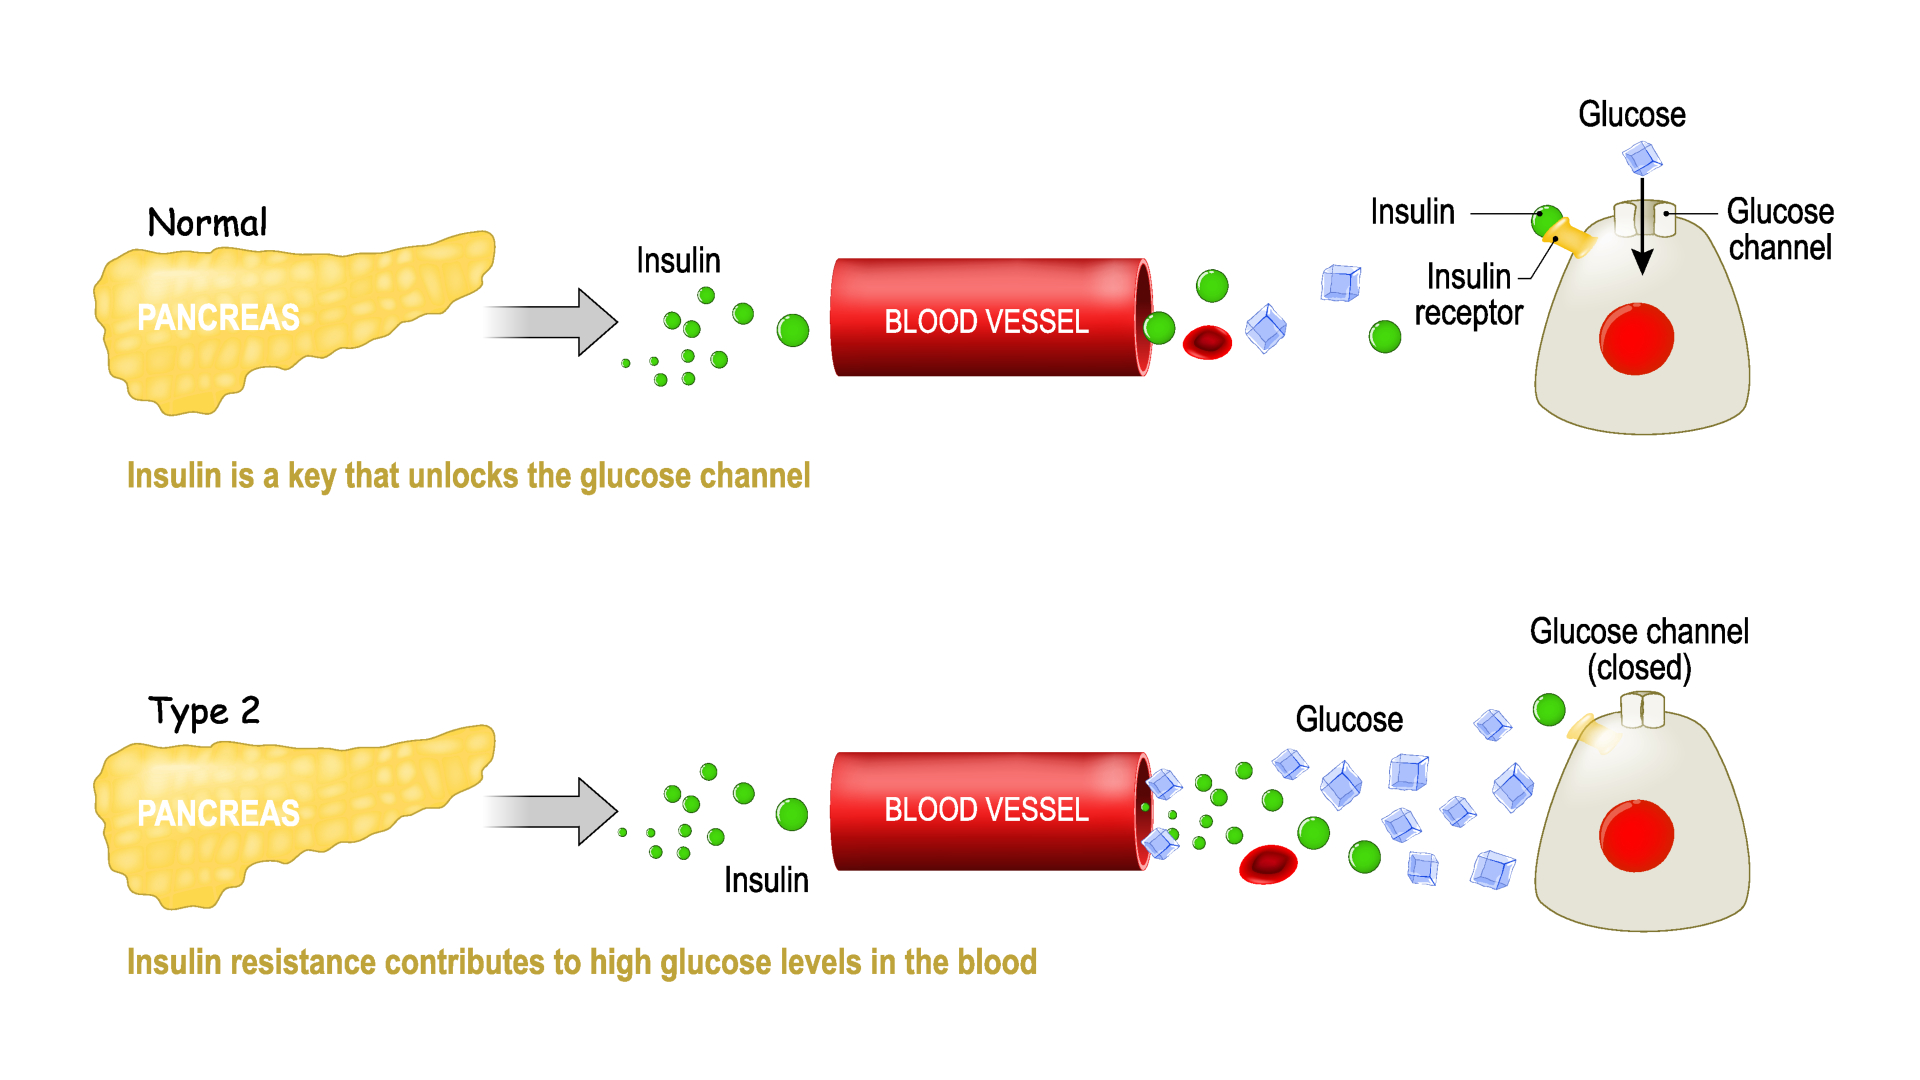 Type 2 diabetes diagram - Comparison of cell work in diabetes and in a healthy body. Designua via Shutterstock